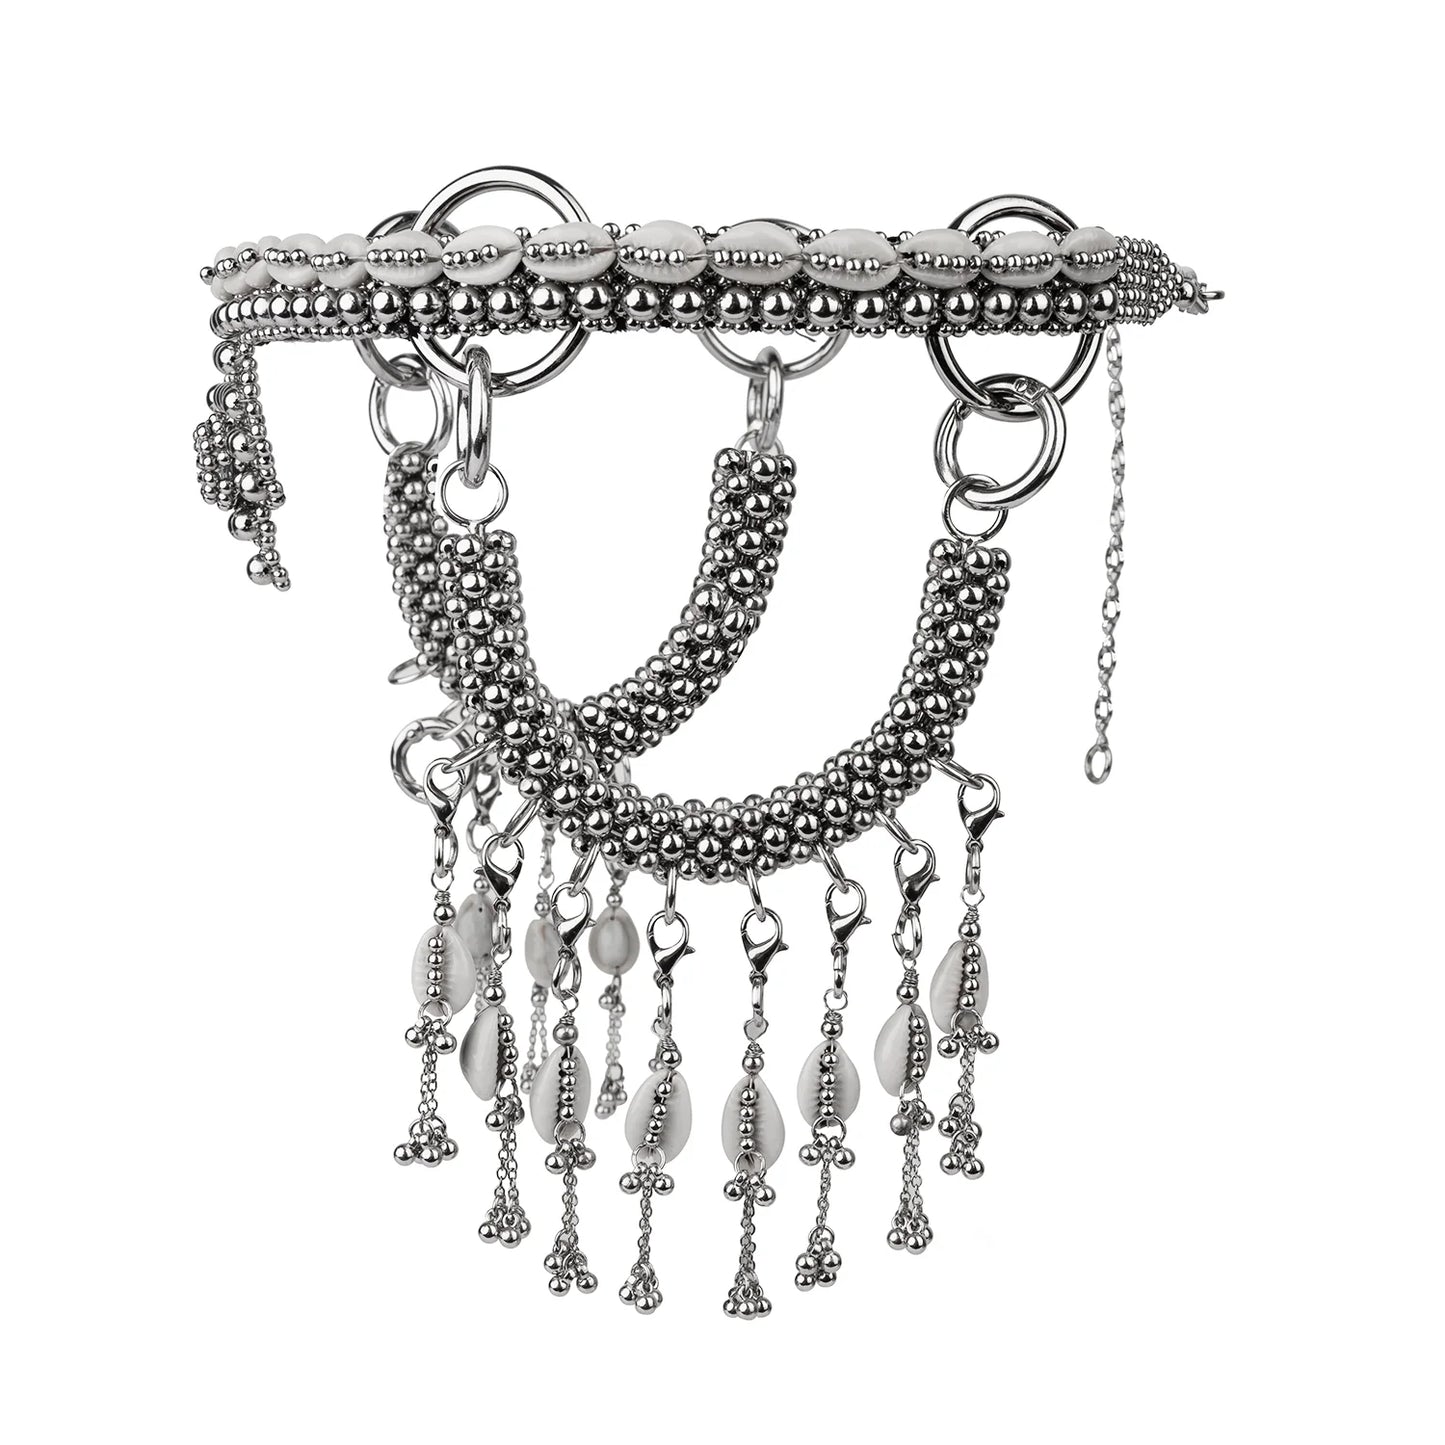 Rushi modular headpieces system in silver